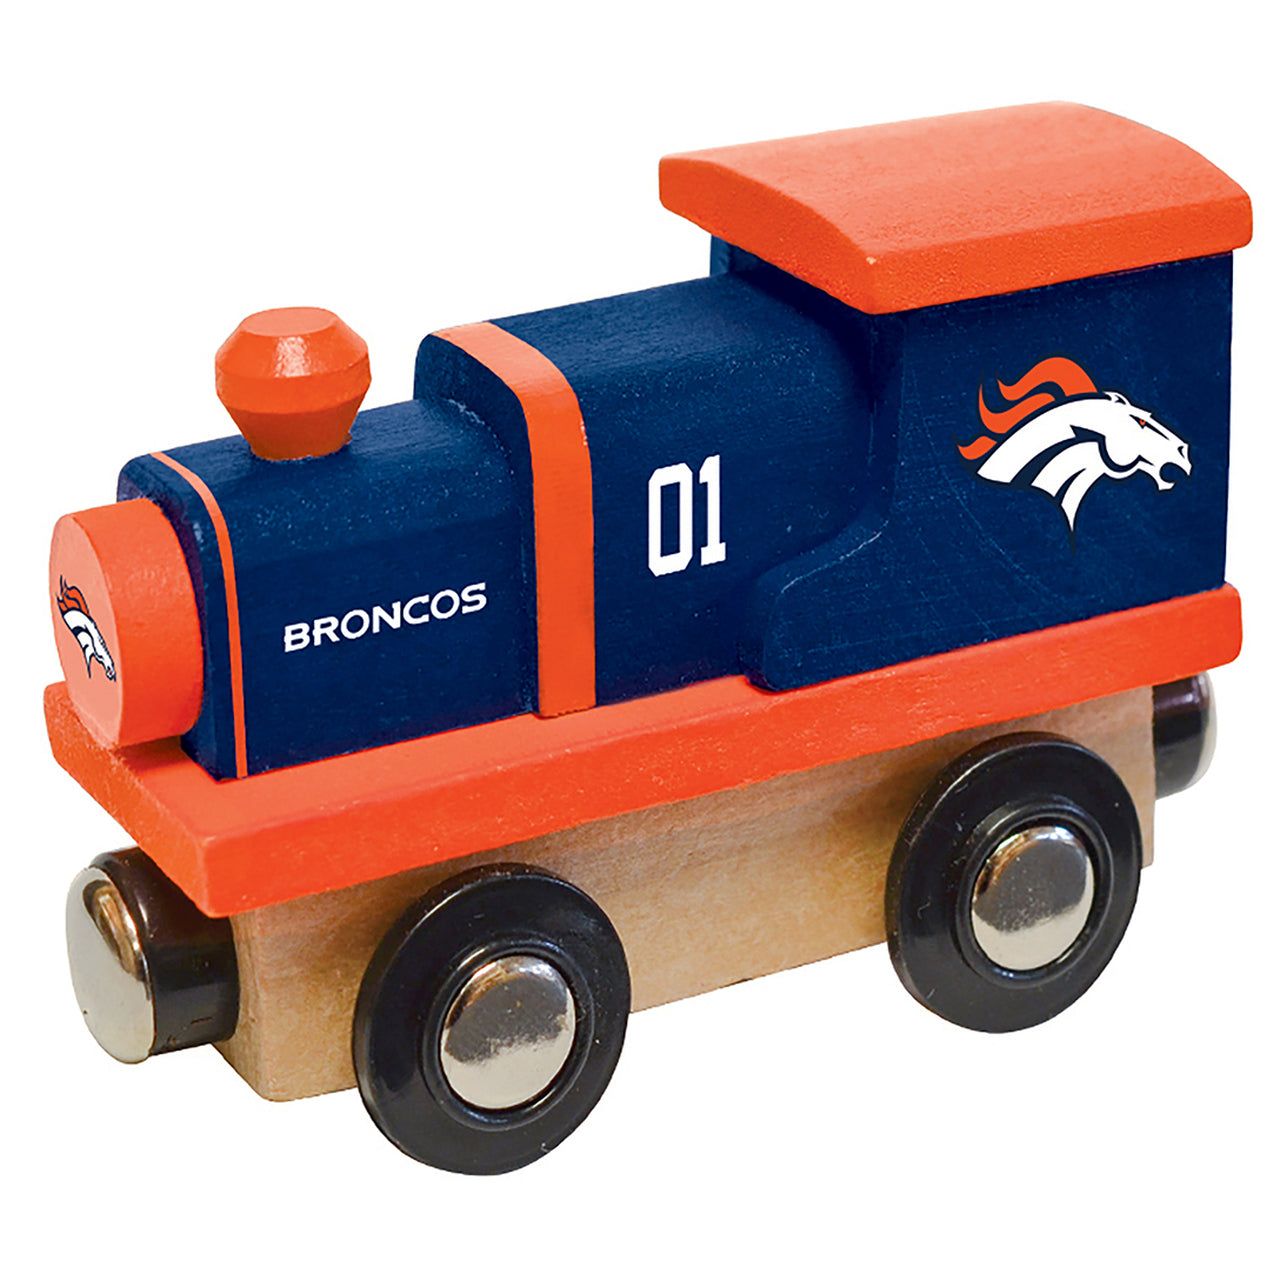 Denver Broncos Wooden Toy Train Engine by Masterpieces